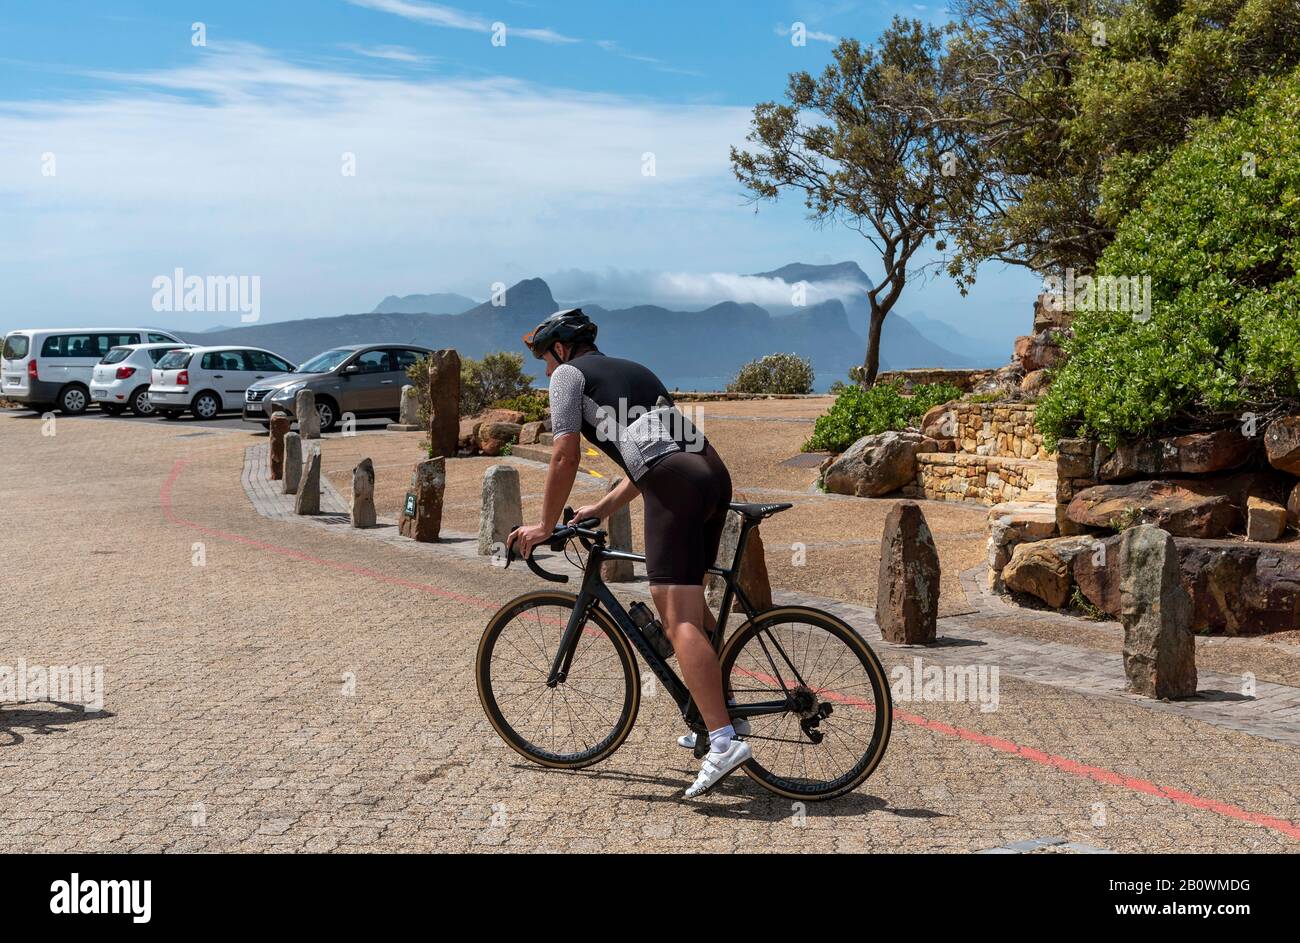 Cape Point, Table Mountain National Park, South Africa. Dec 2019.  Cyclist set off from the Cape Point parking area on a cycle ride through the Table Stock Photo